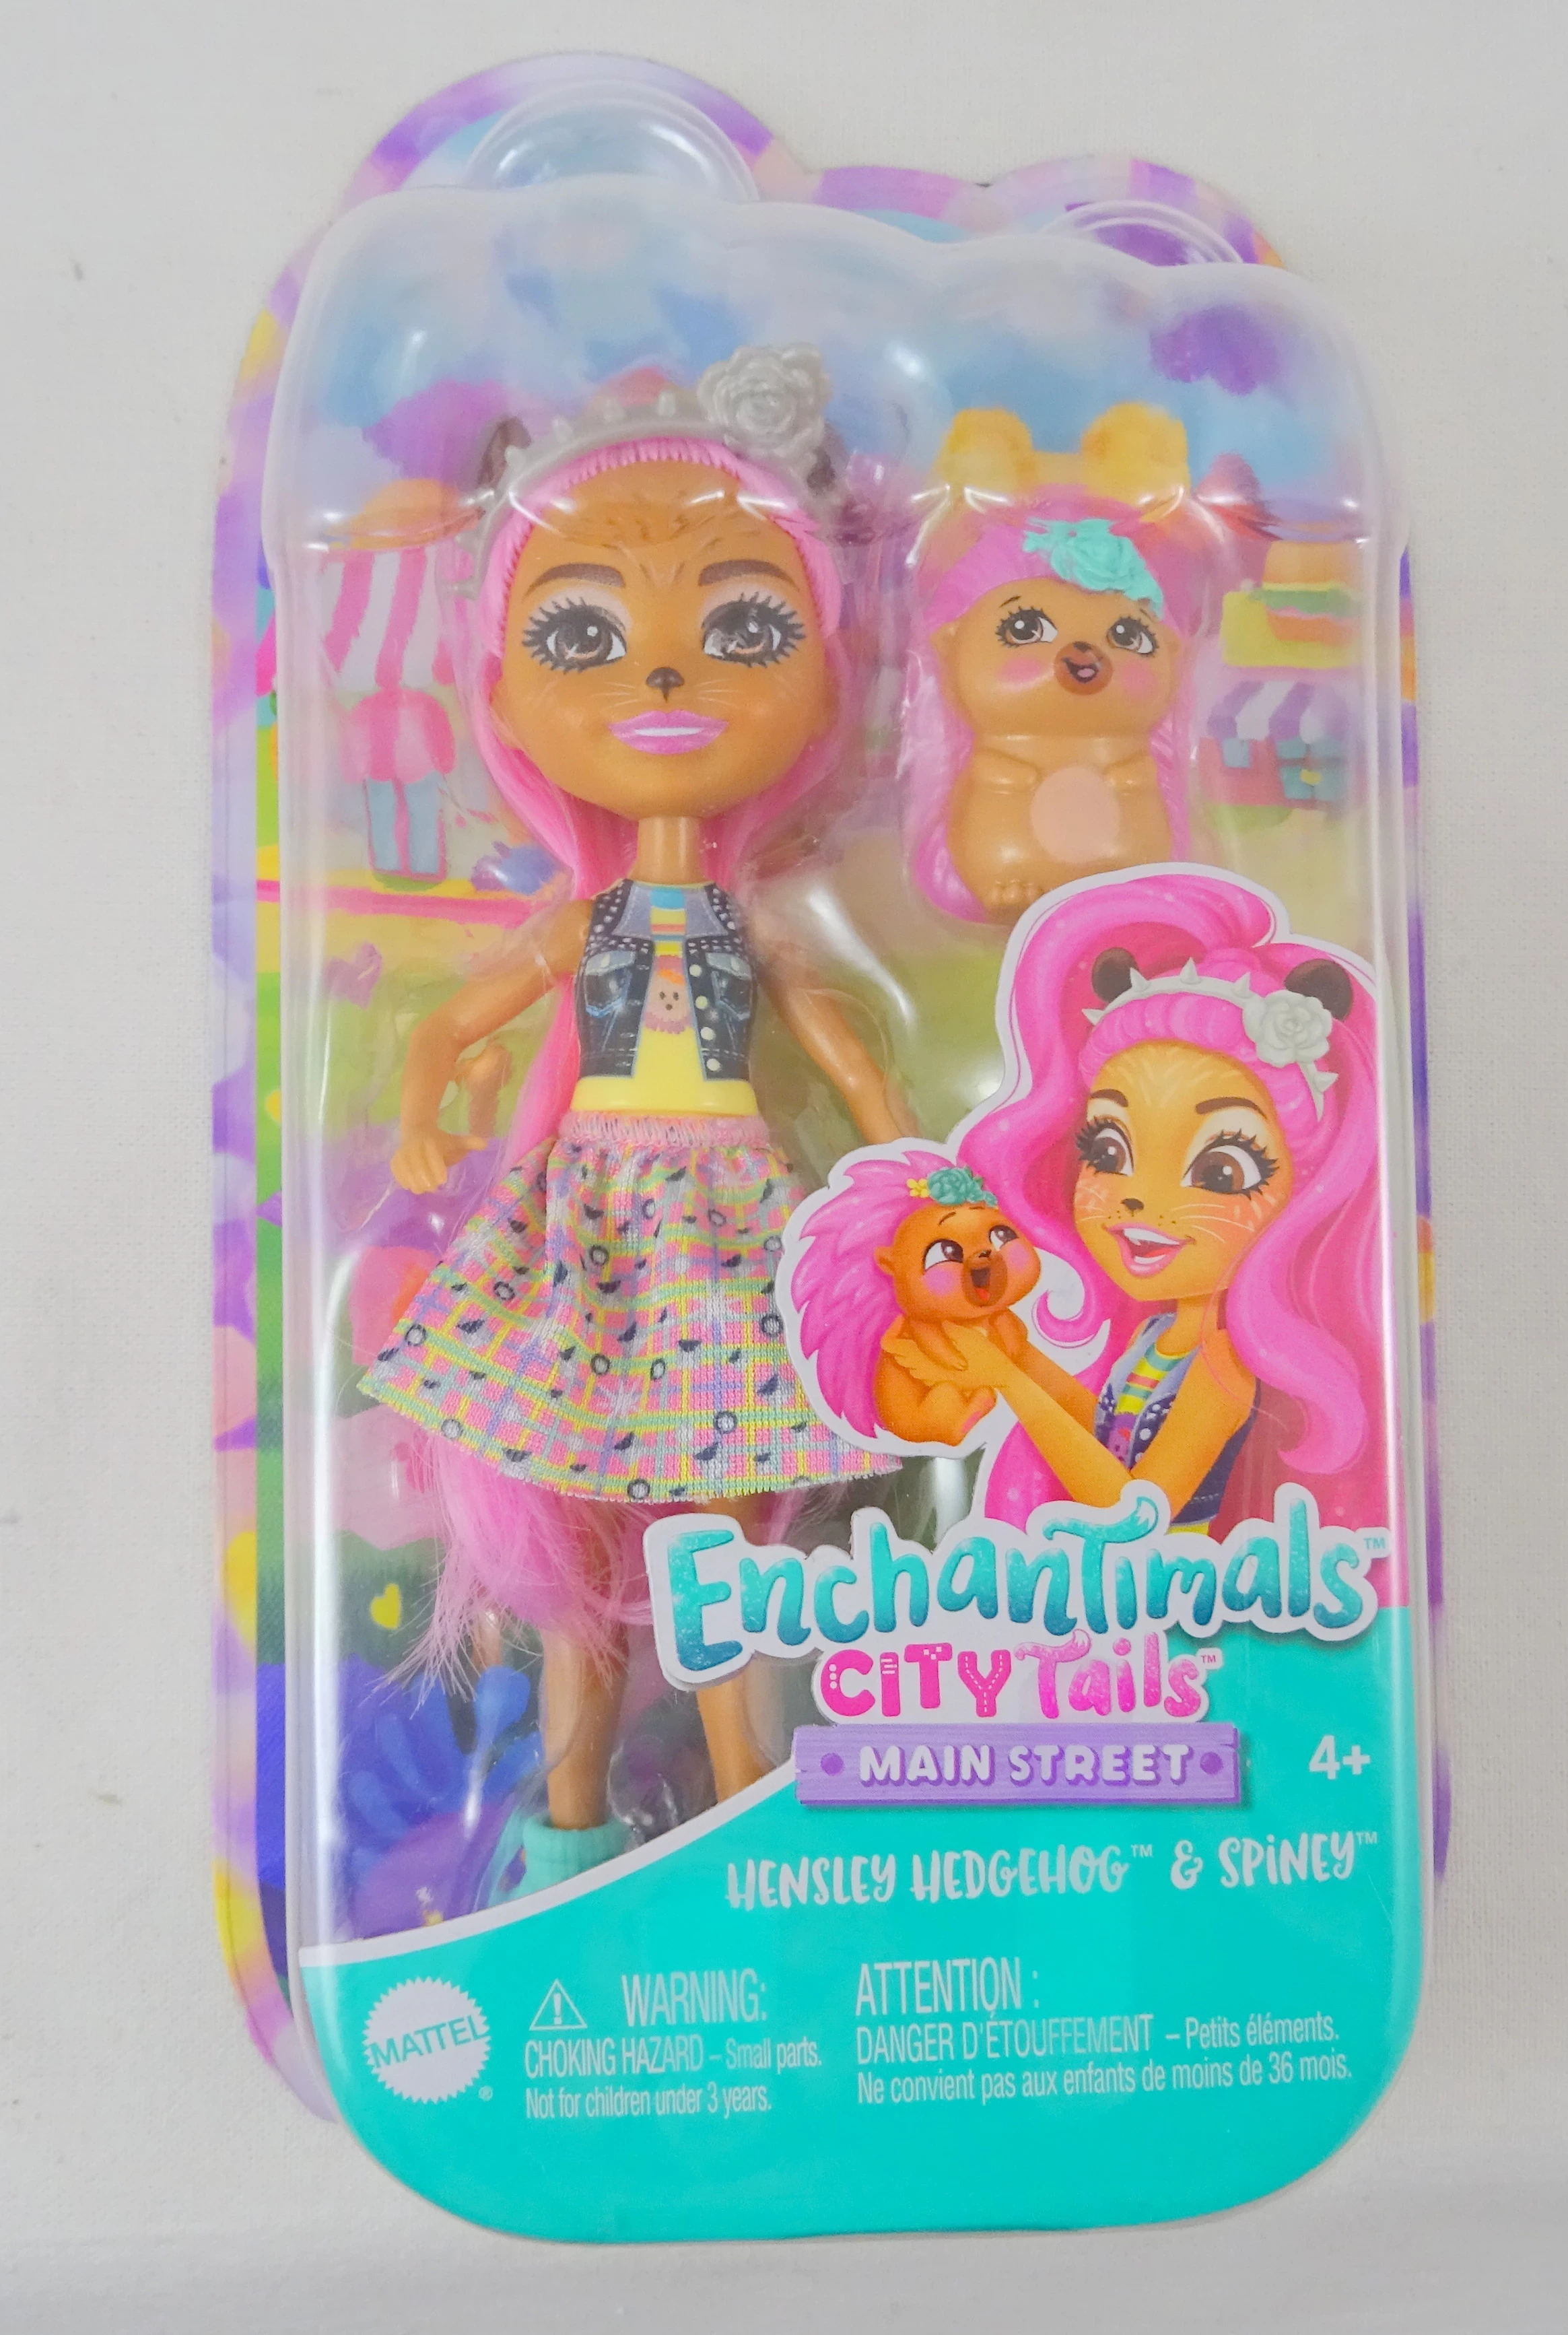 Enchantimals City Tails Doll - Hensley Hedgehog and Spiney